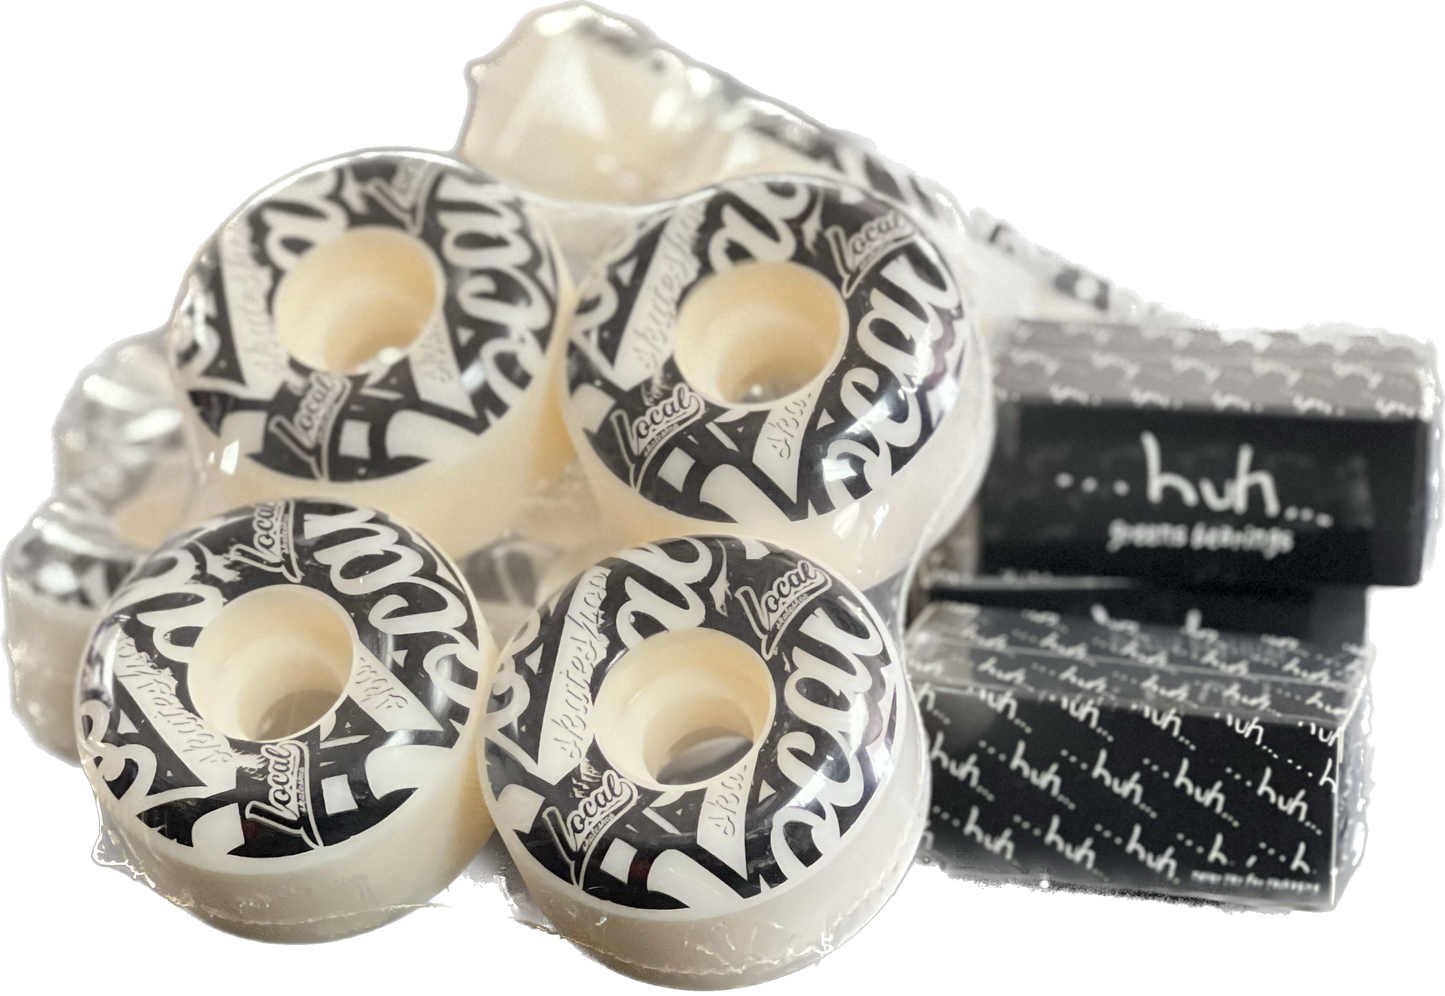 local 54mm wheels and duh bearings combo pack